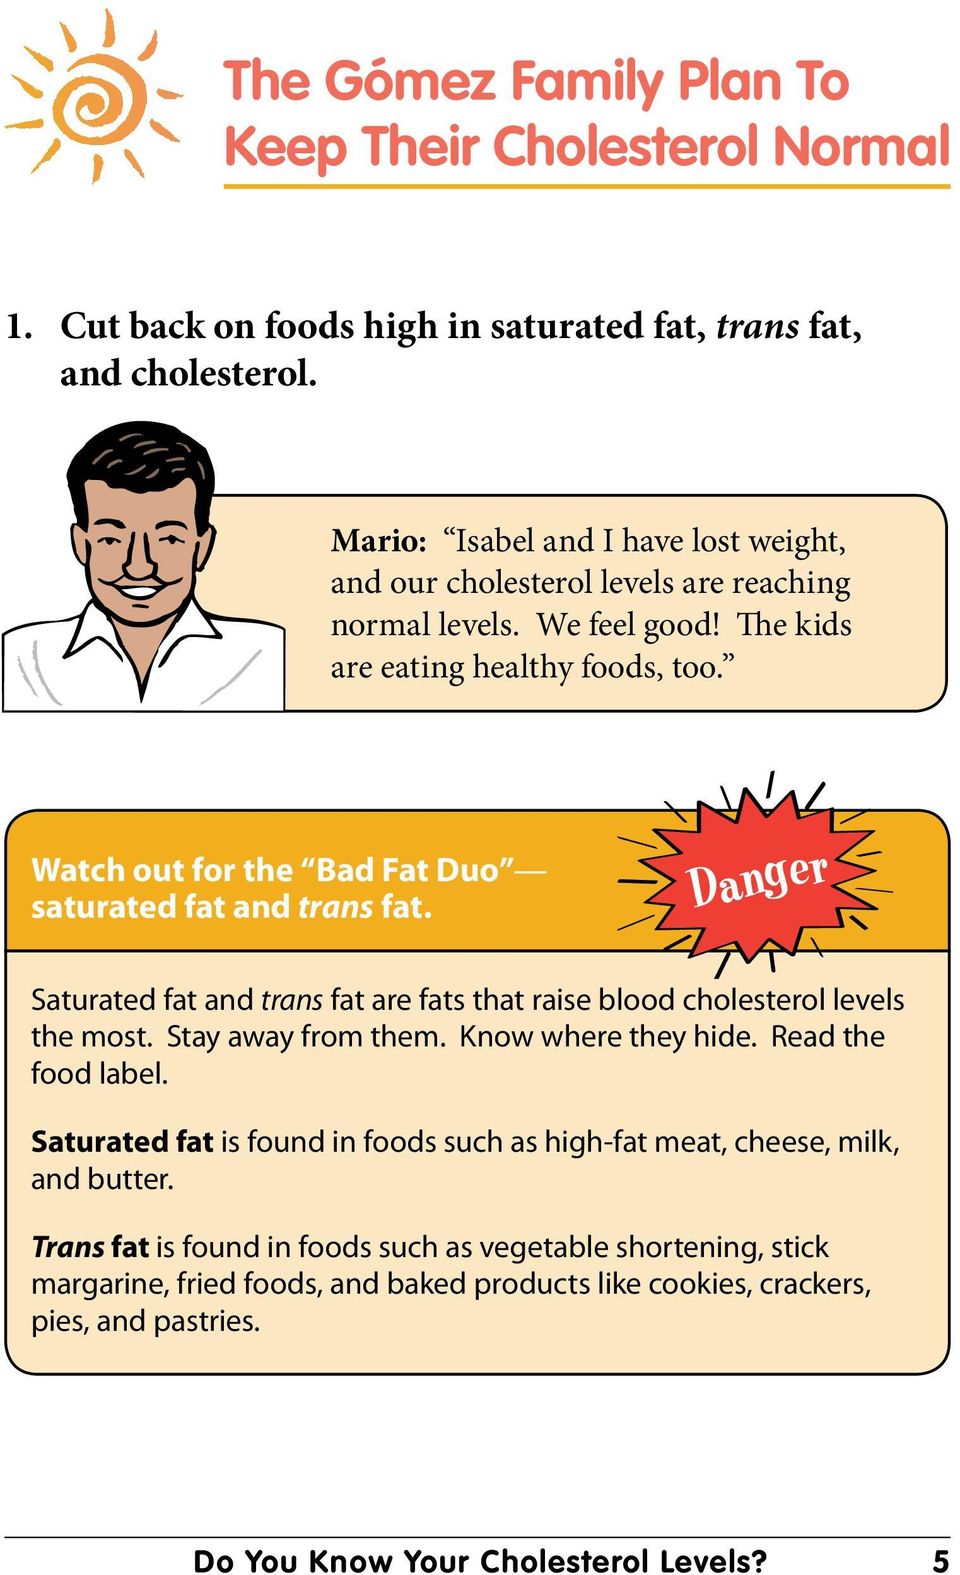 Watch out for the Bad Fat Duo saturated fat and trans fat. Saturated fat and trans fat are fats that raise blood cholesterol levels the most. Stay away from them. Know where they hide.